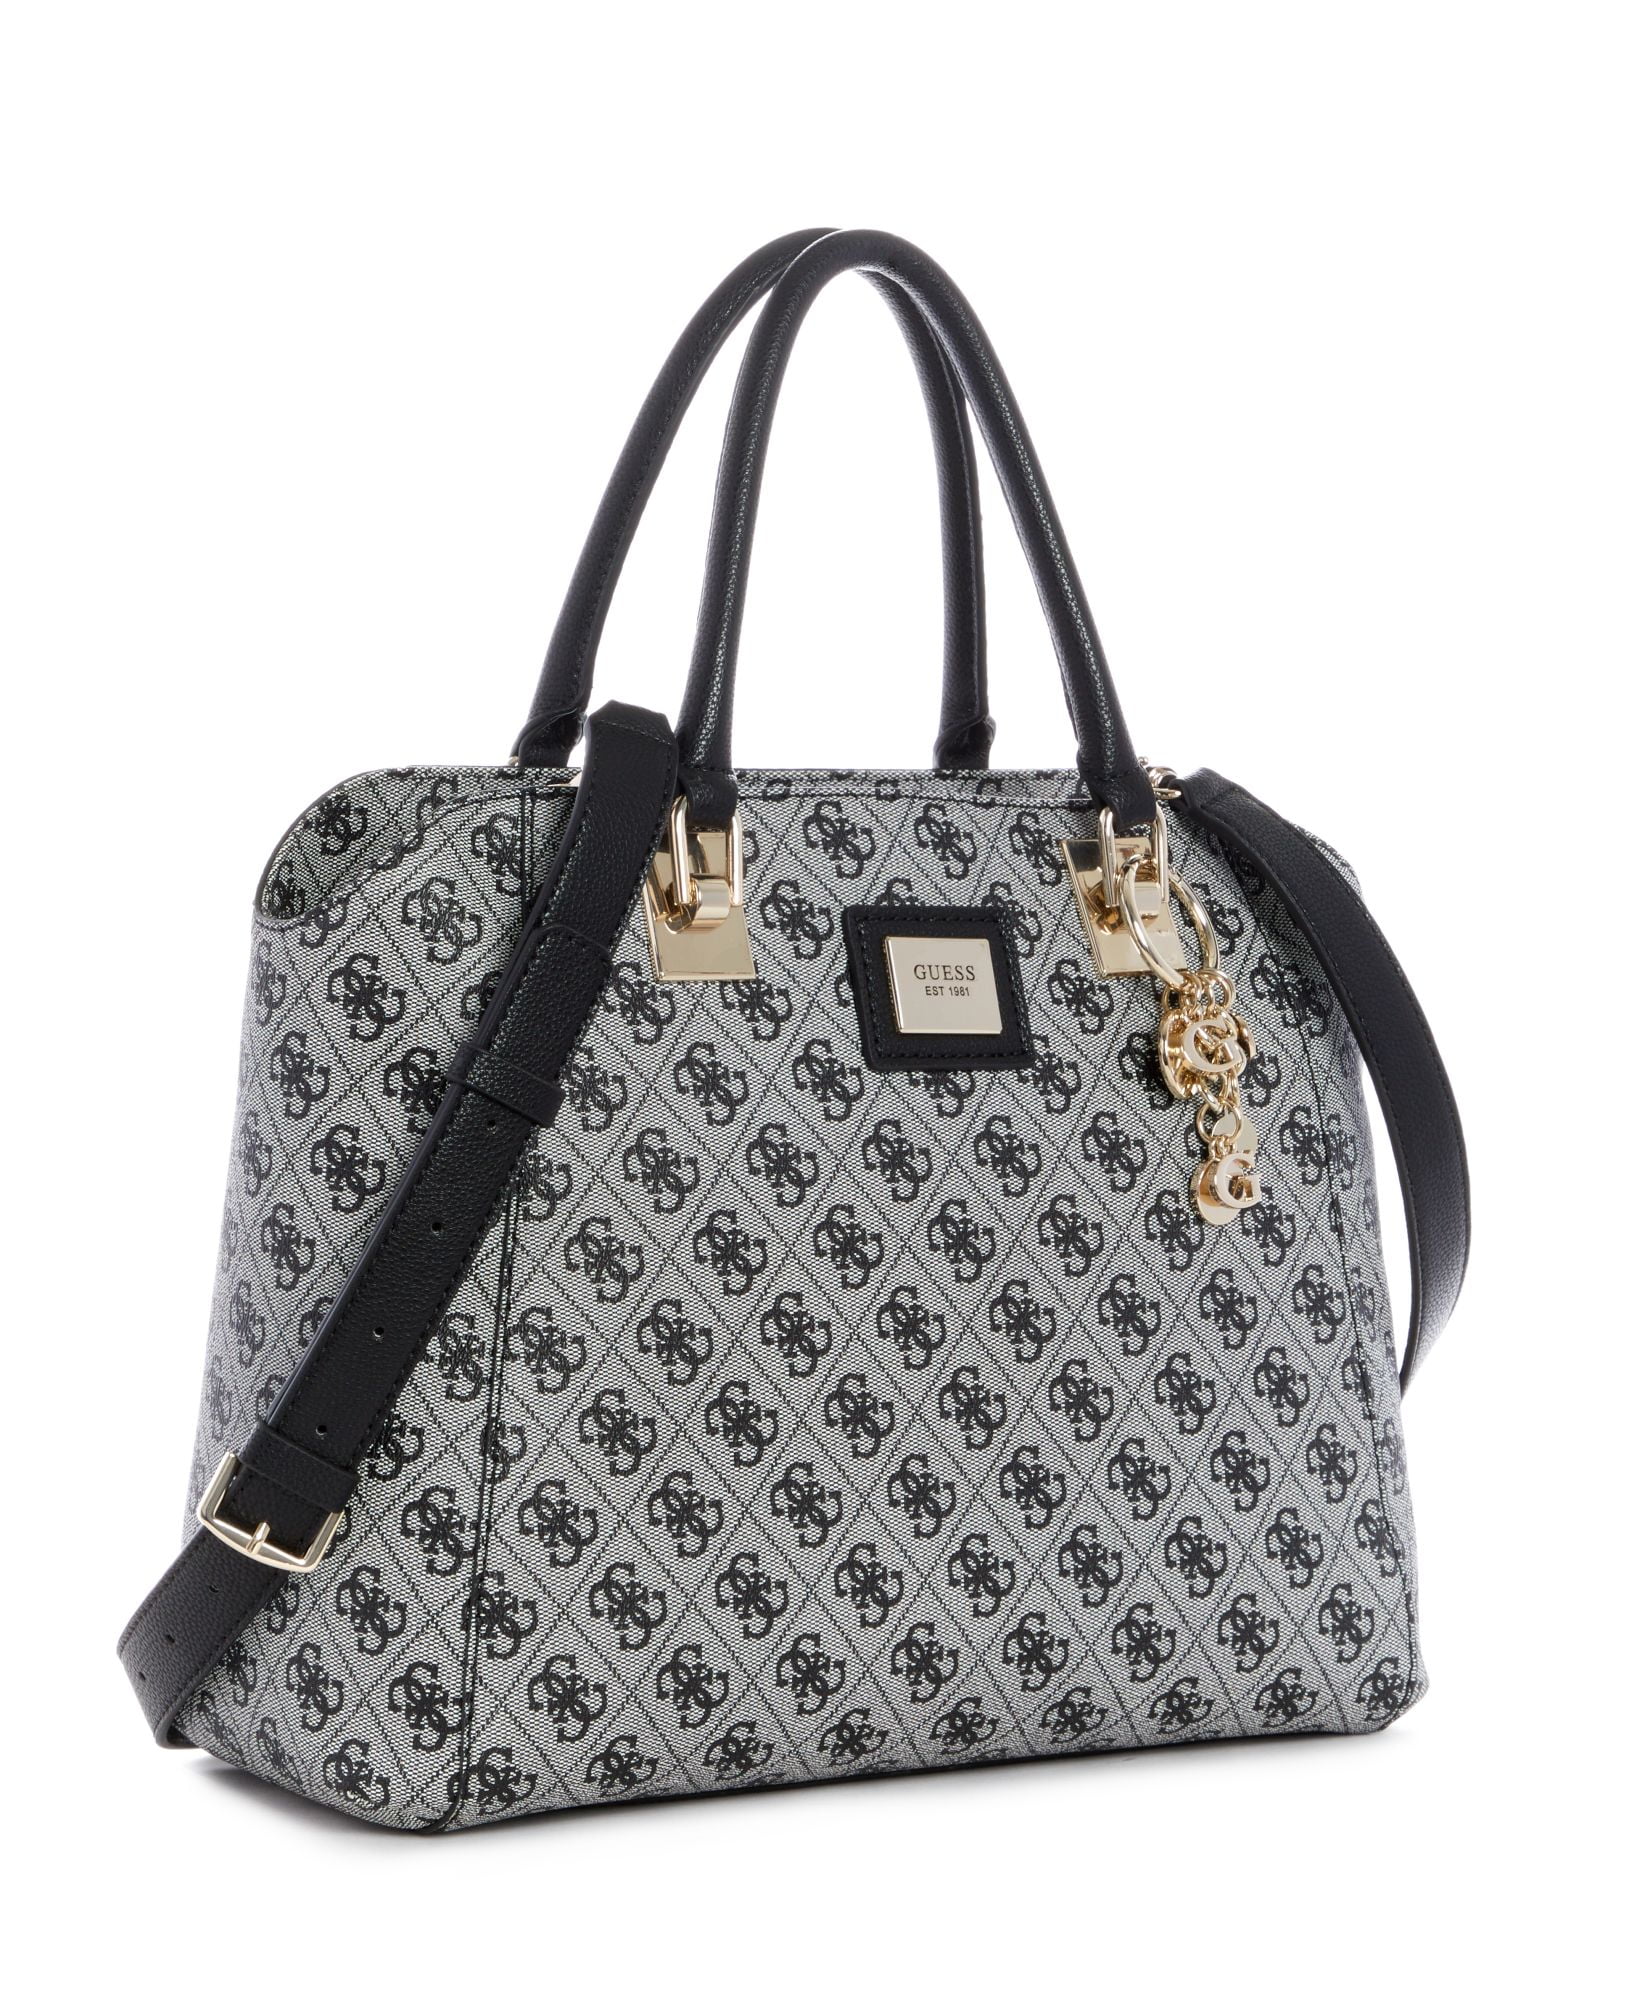 Guess Womens Candace Elite Carryall Satchel 